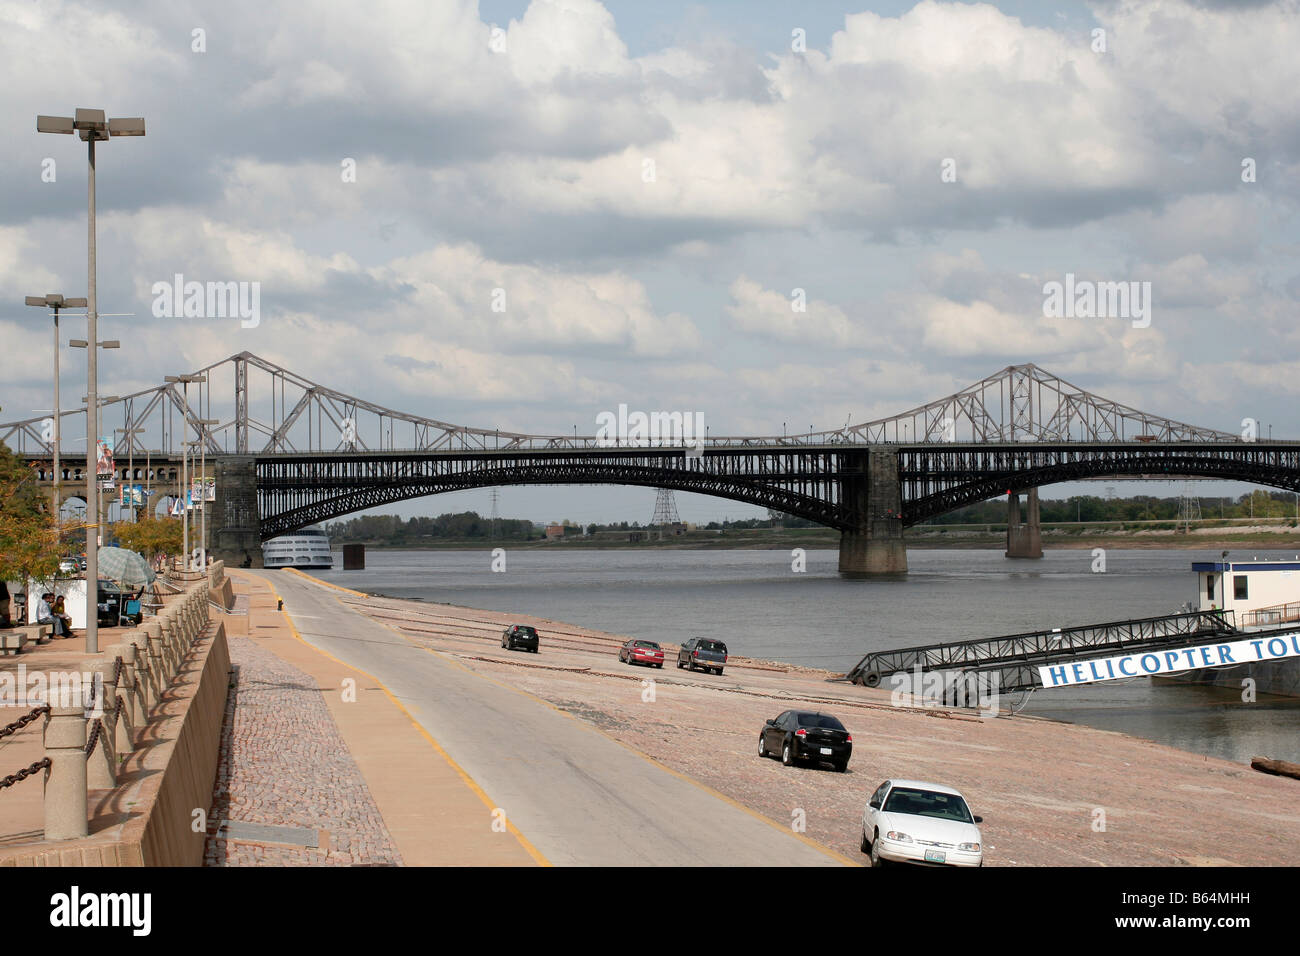 St Louis waterfront on the Mississippi river looking toward Eads bridge Stock Photo